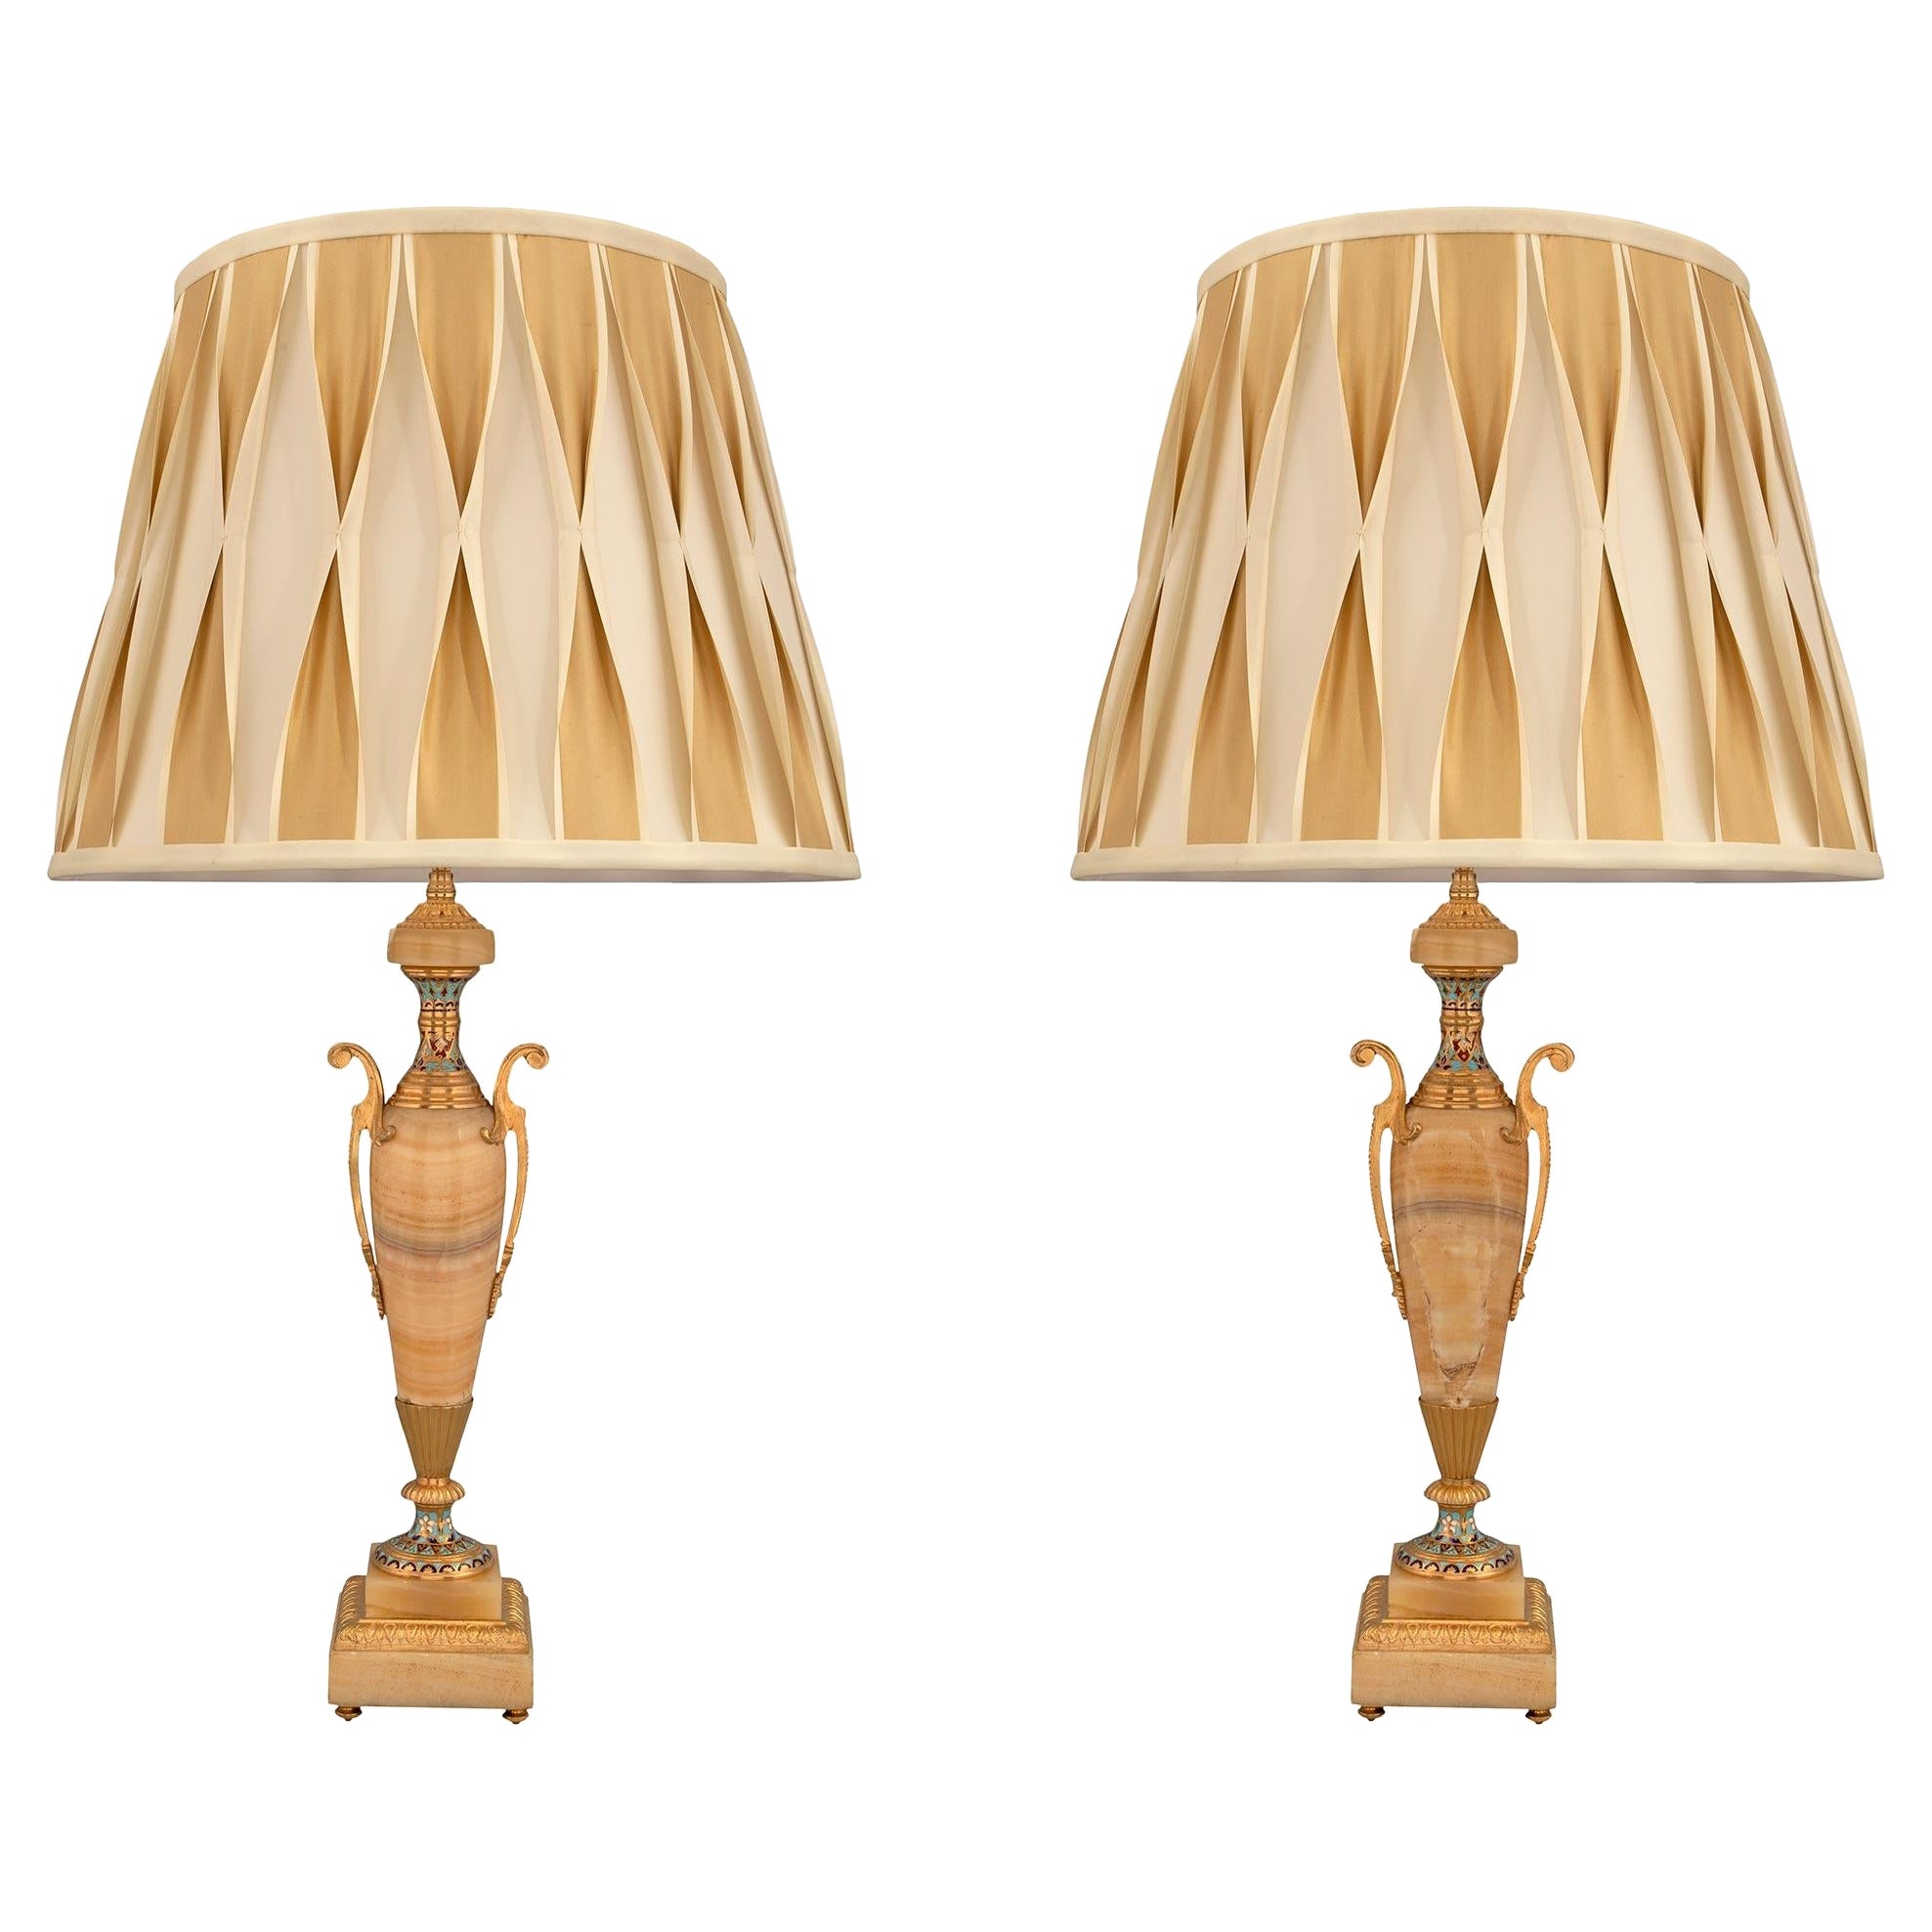 Pair of French 19th Century Neo-Classical Onyx, Ormolu and Cloisonné Lamps